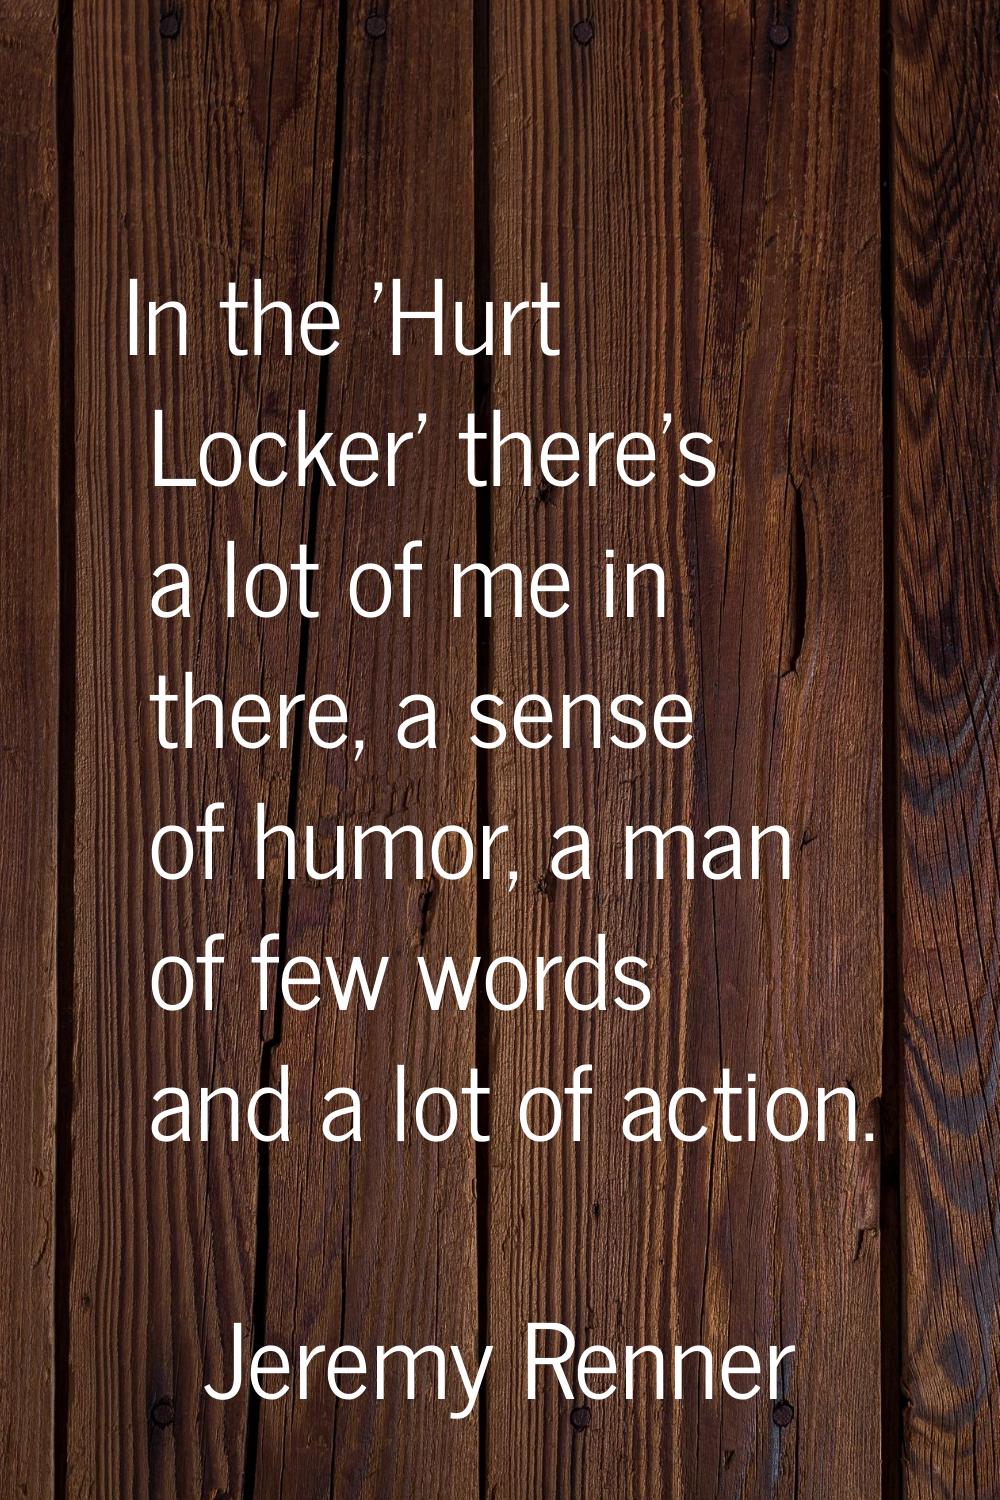 In the 'Hurt Locker' there's a lot of me in there, a sense of humor, a man of few words and a lot o